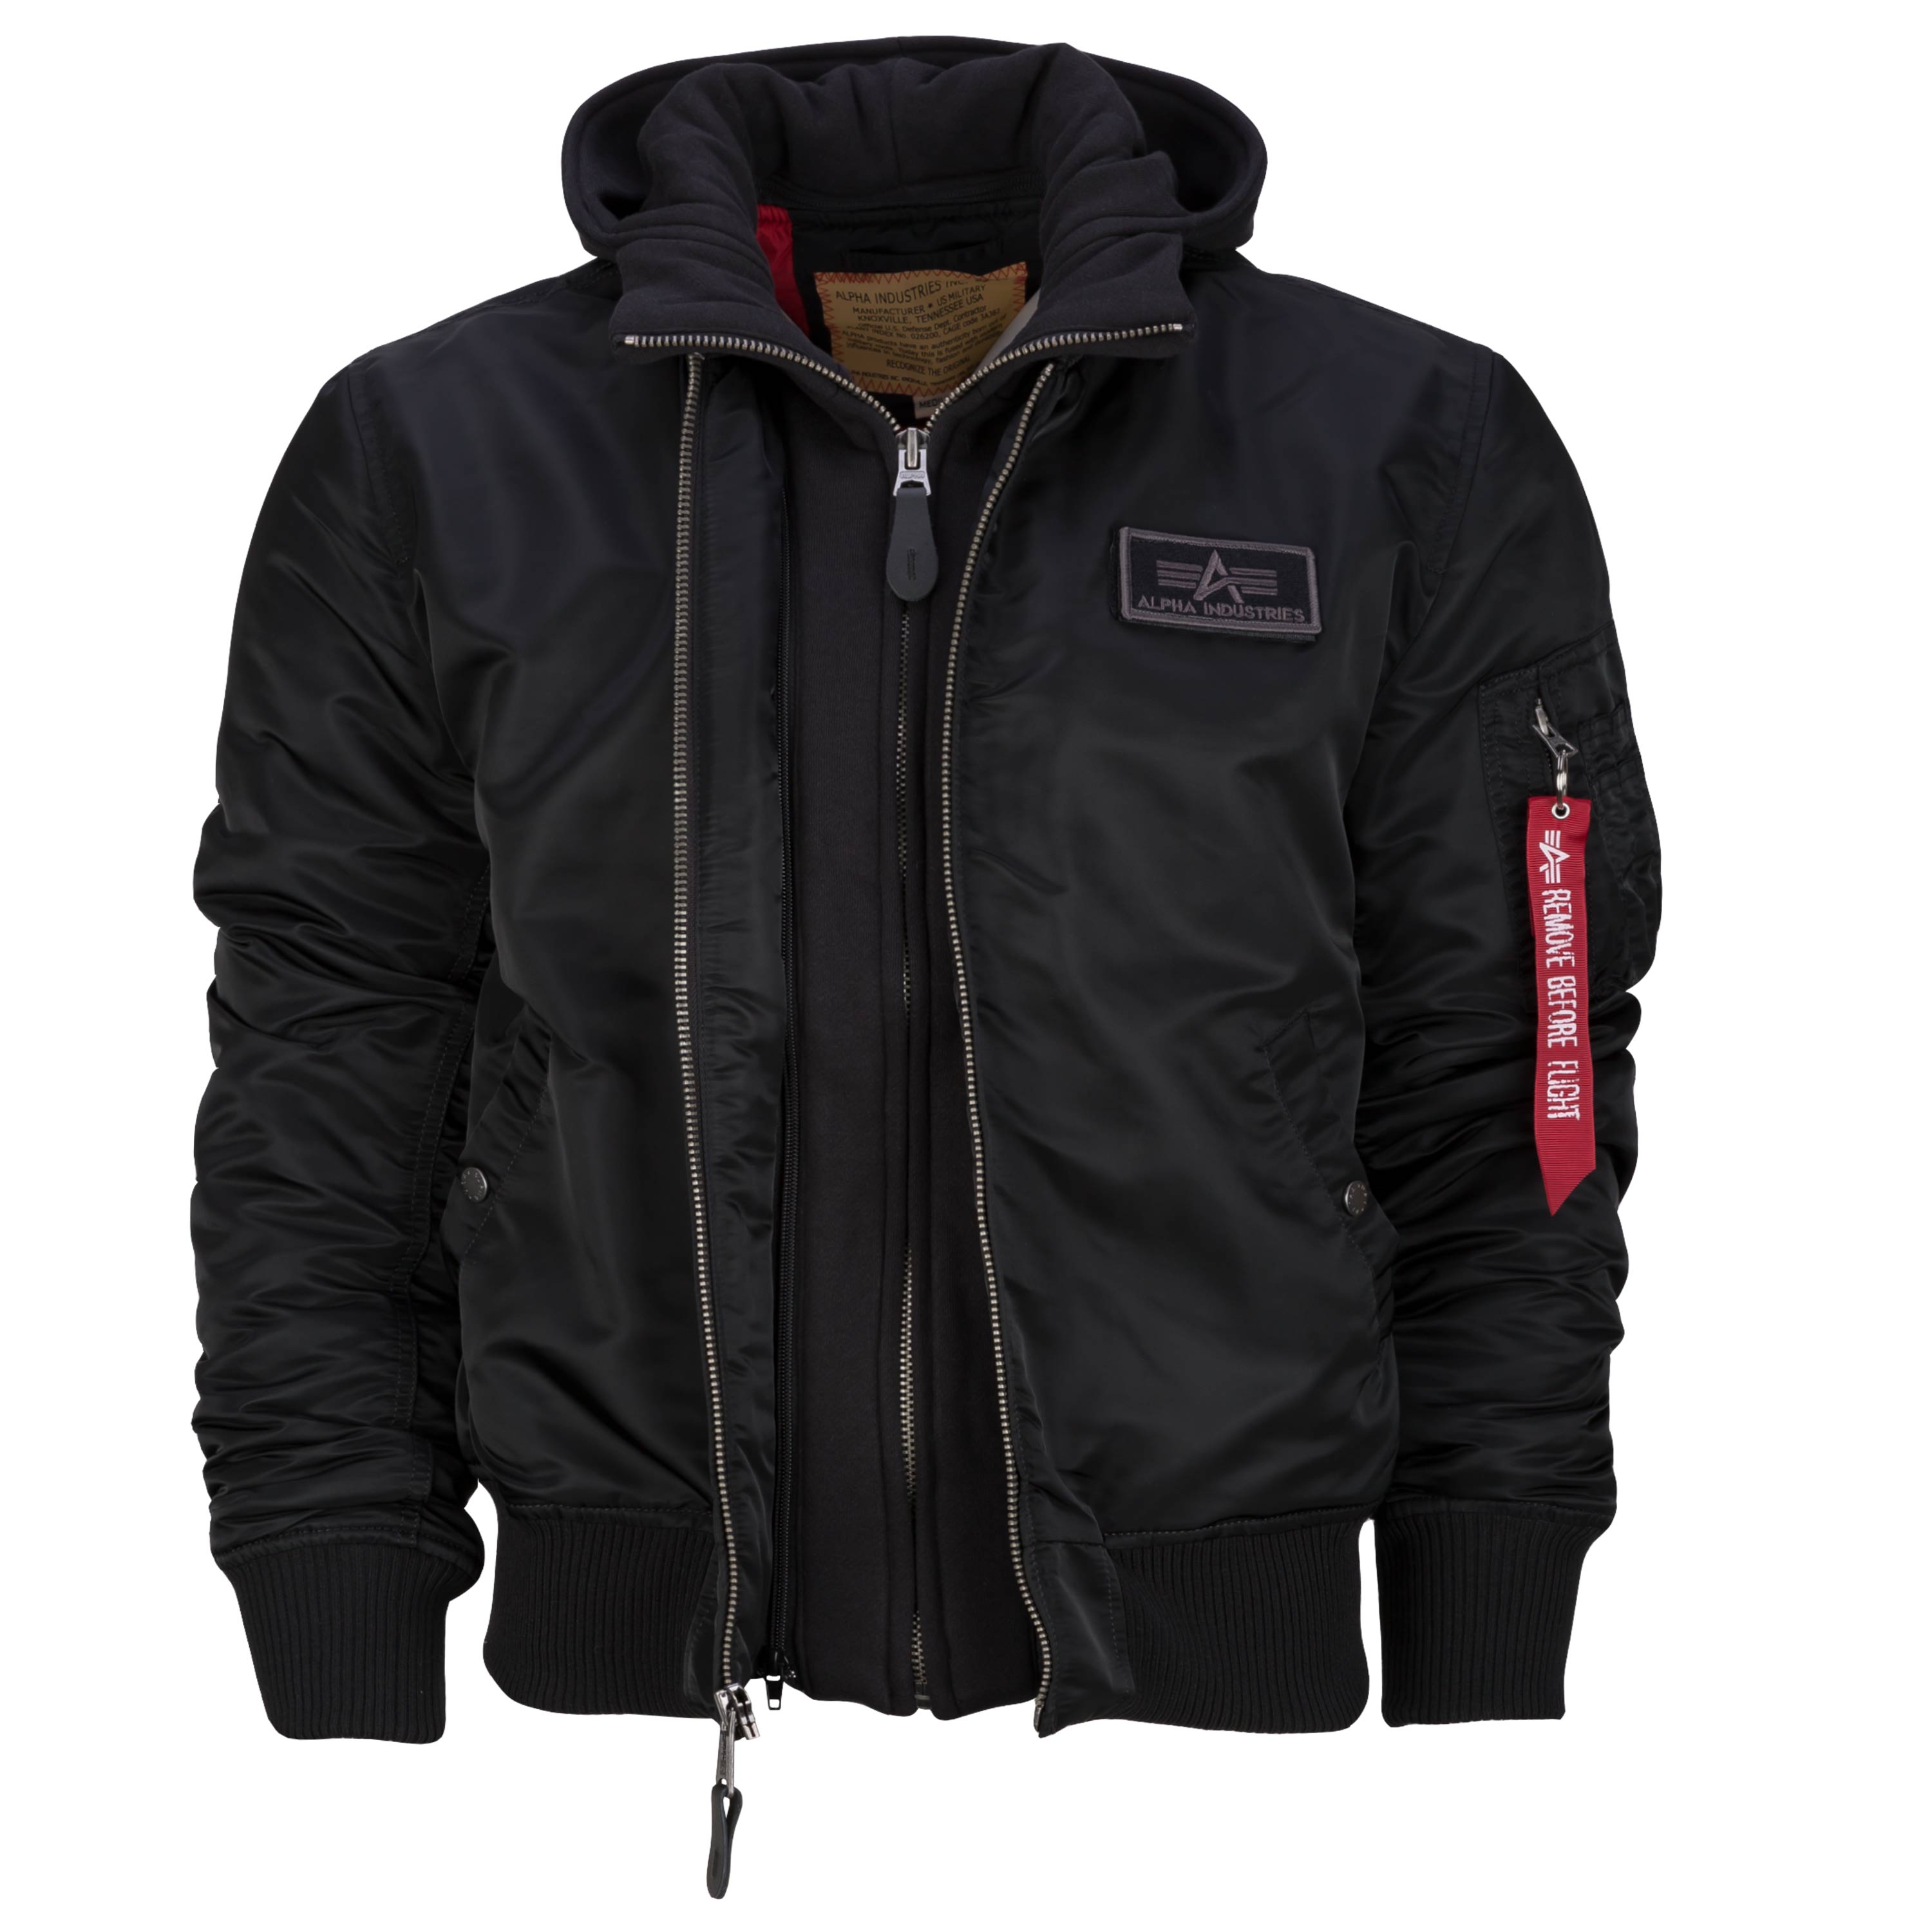 ASMC Alpha black Purchase the MA-1 by II Industries D-Tec Jacket